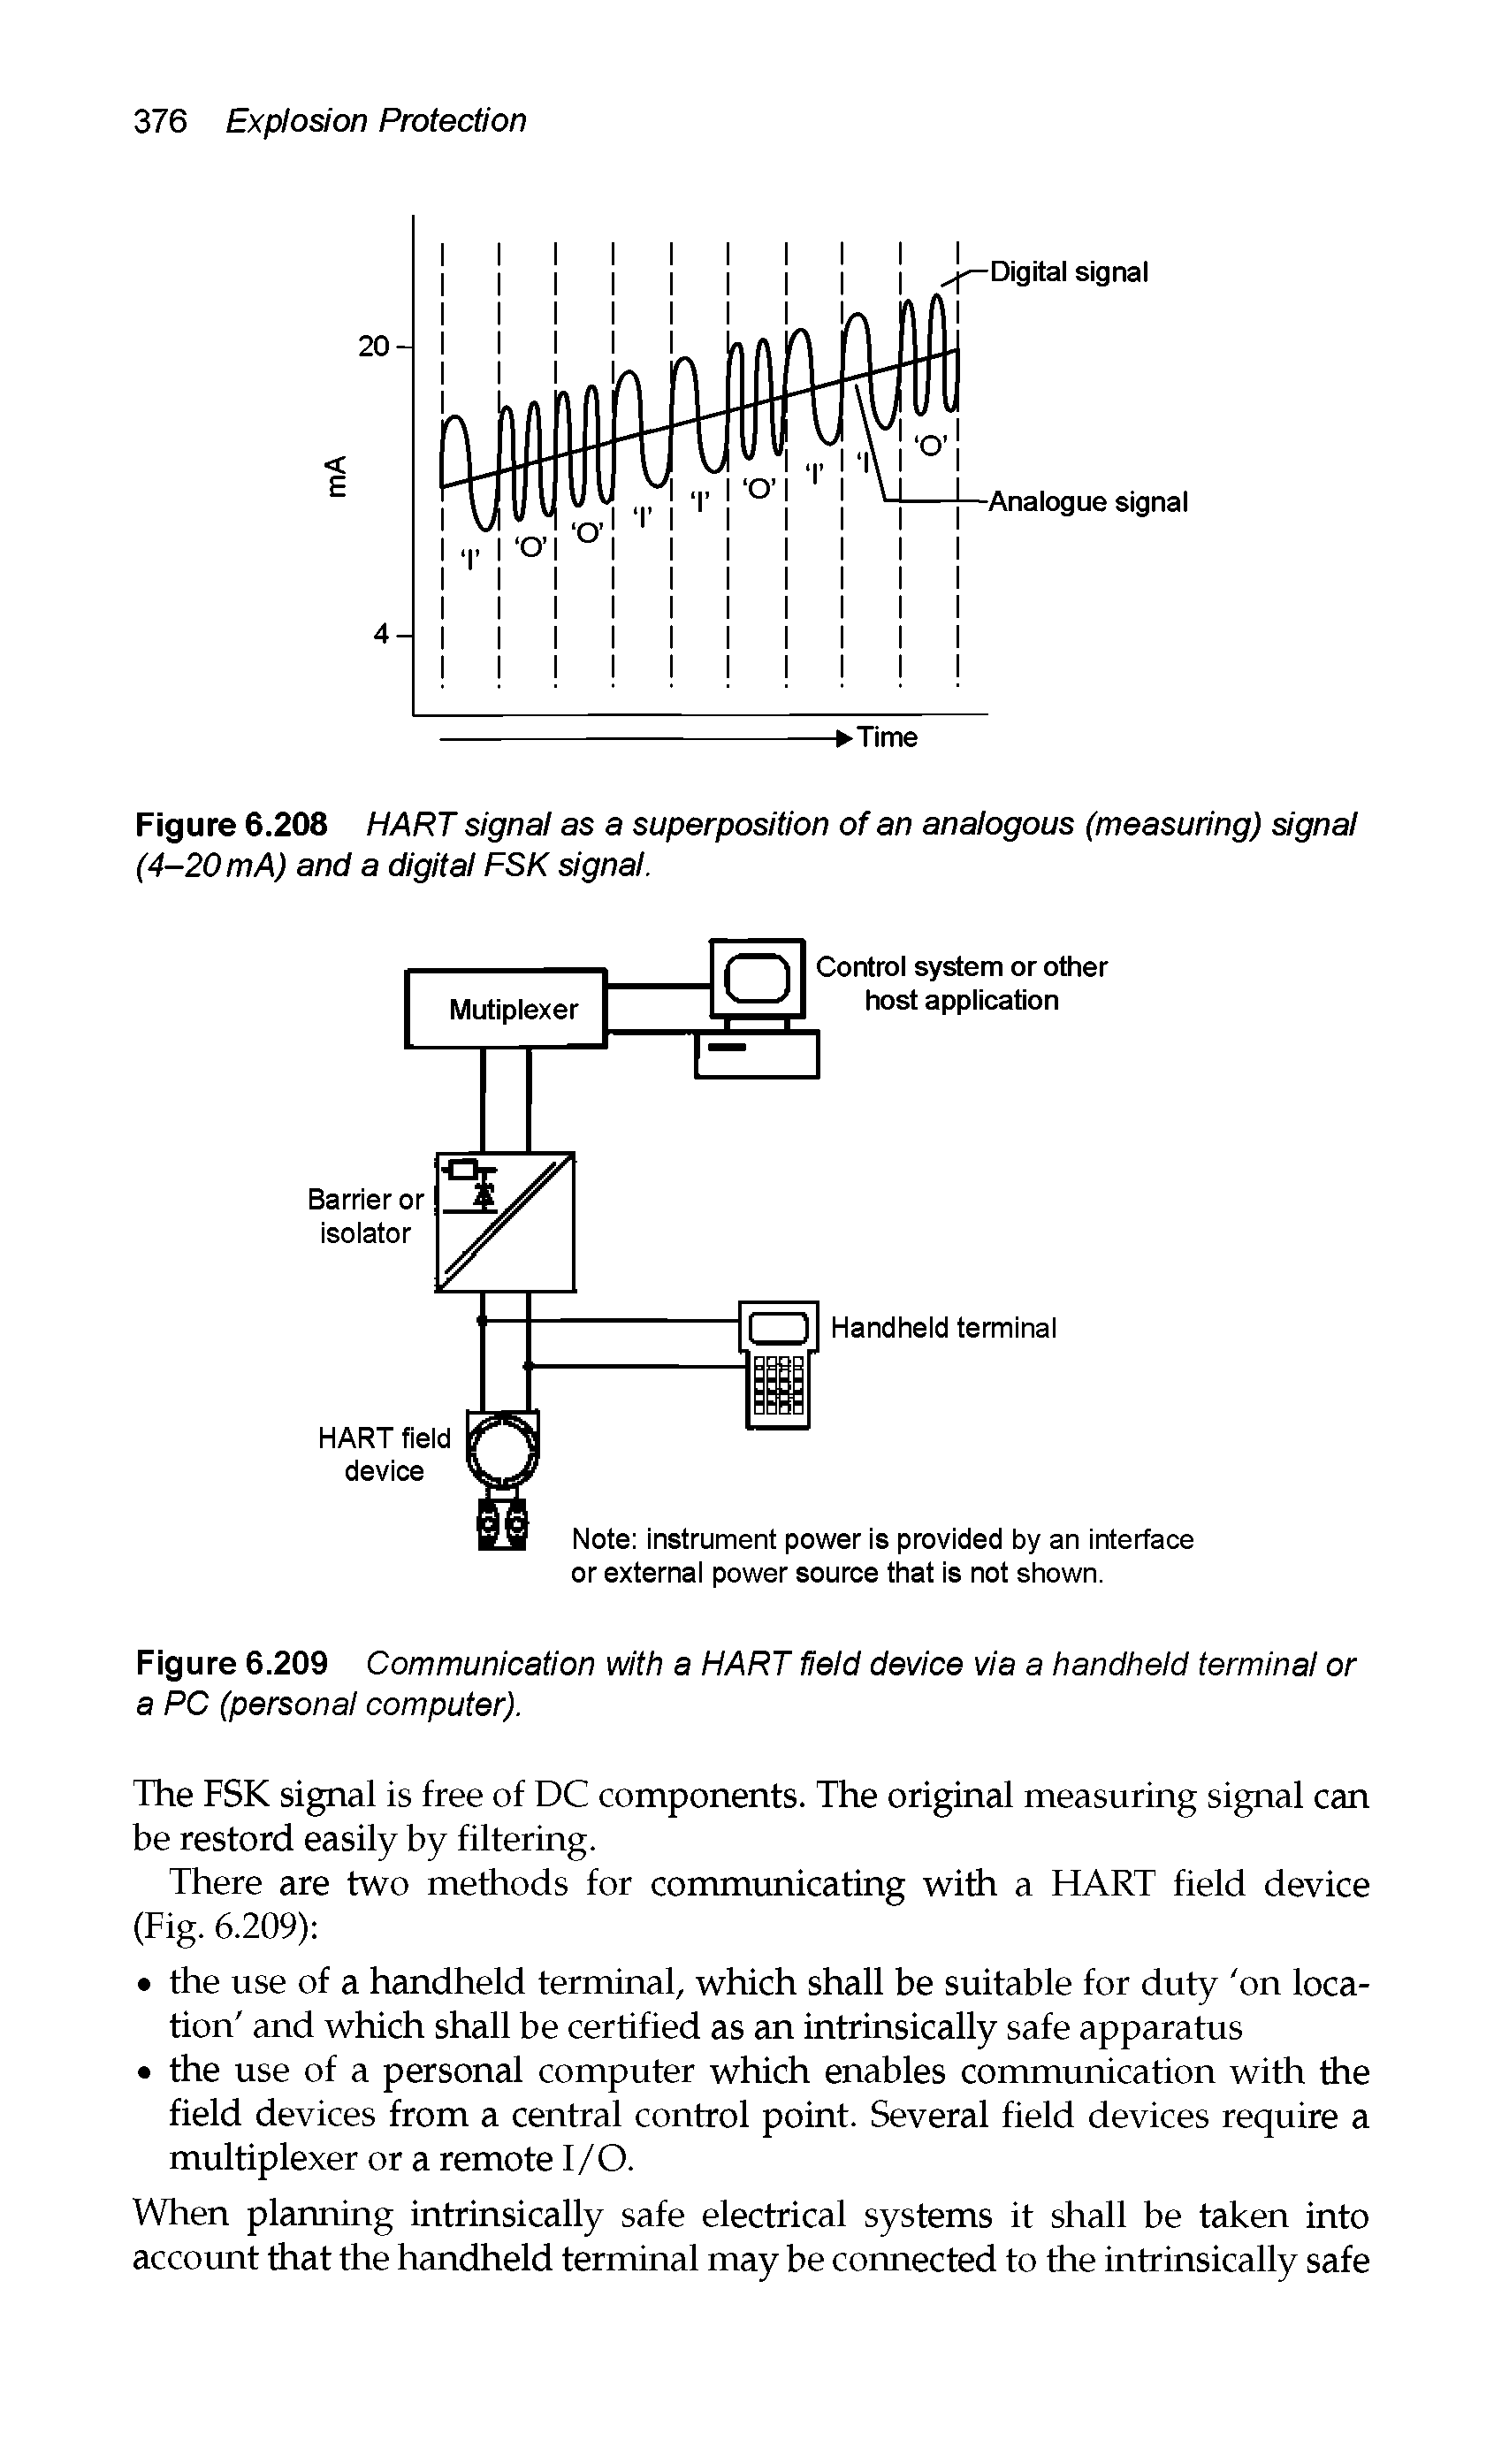 Figure 6.209 Communication with a HART field device via a handheld terminal or a PC (personal computer).